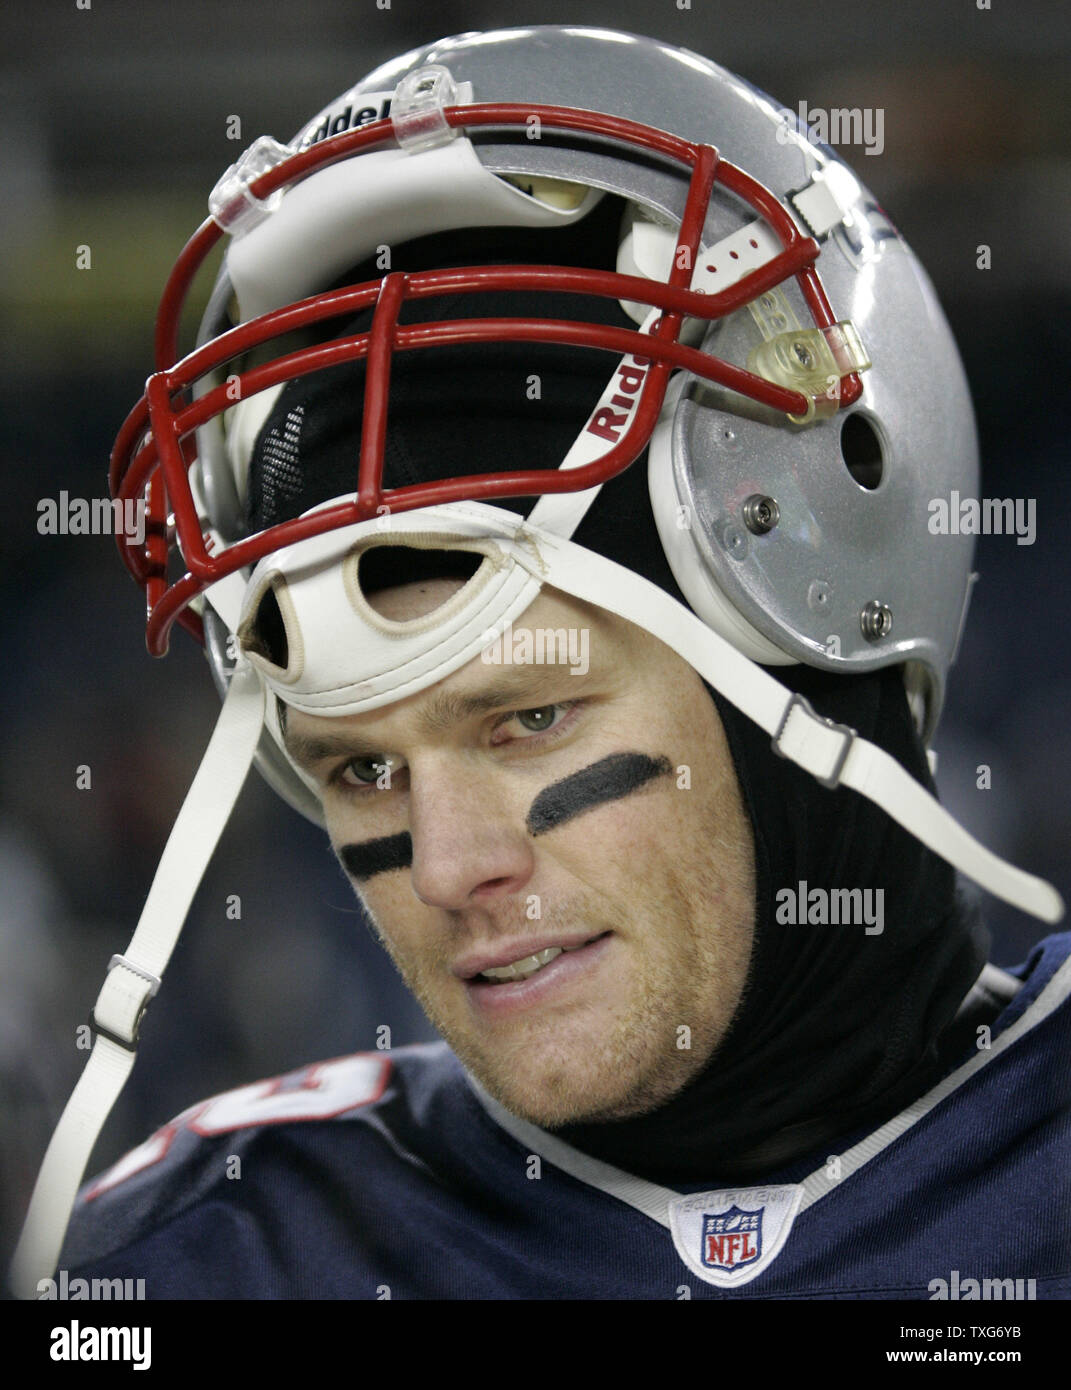 New England Patriots quarterback Tom Brady chats during an interview after the the Patriots defeated the New York Jets 45-3  at Gillette Stadium in Foxboro, Massachusetts on December 6, 2010.    UPI/Matthew Healey Stock Photo